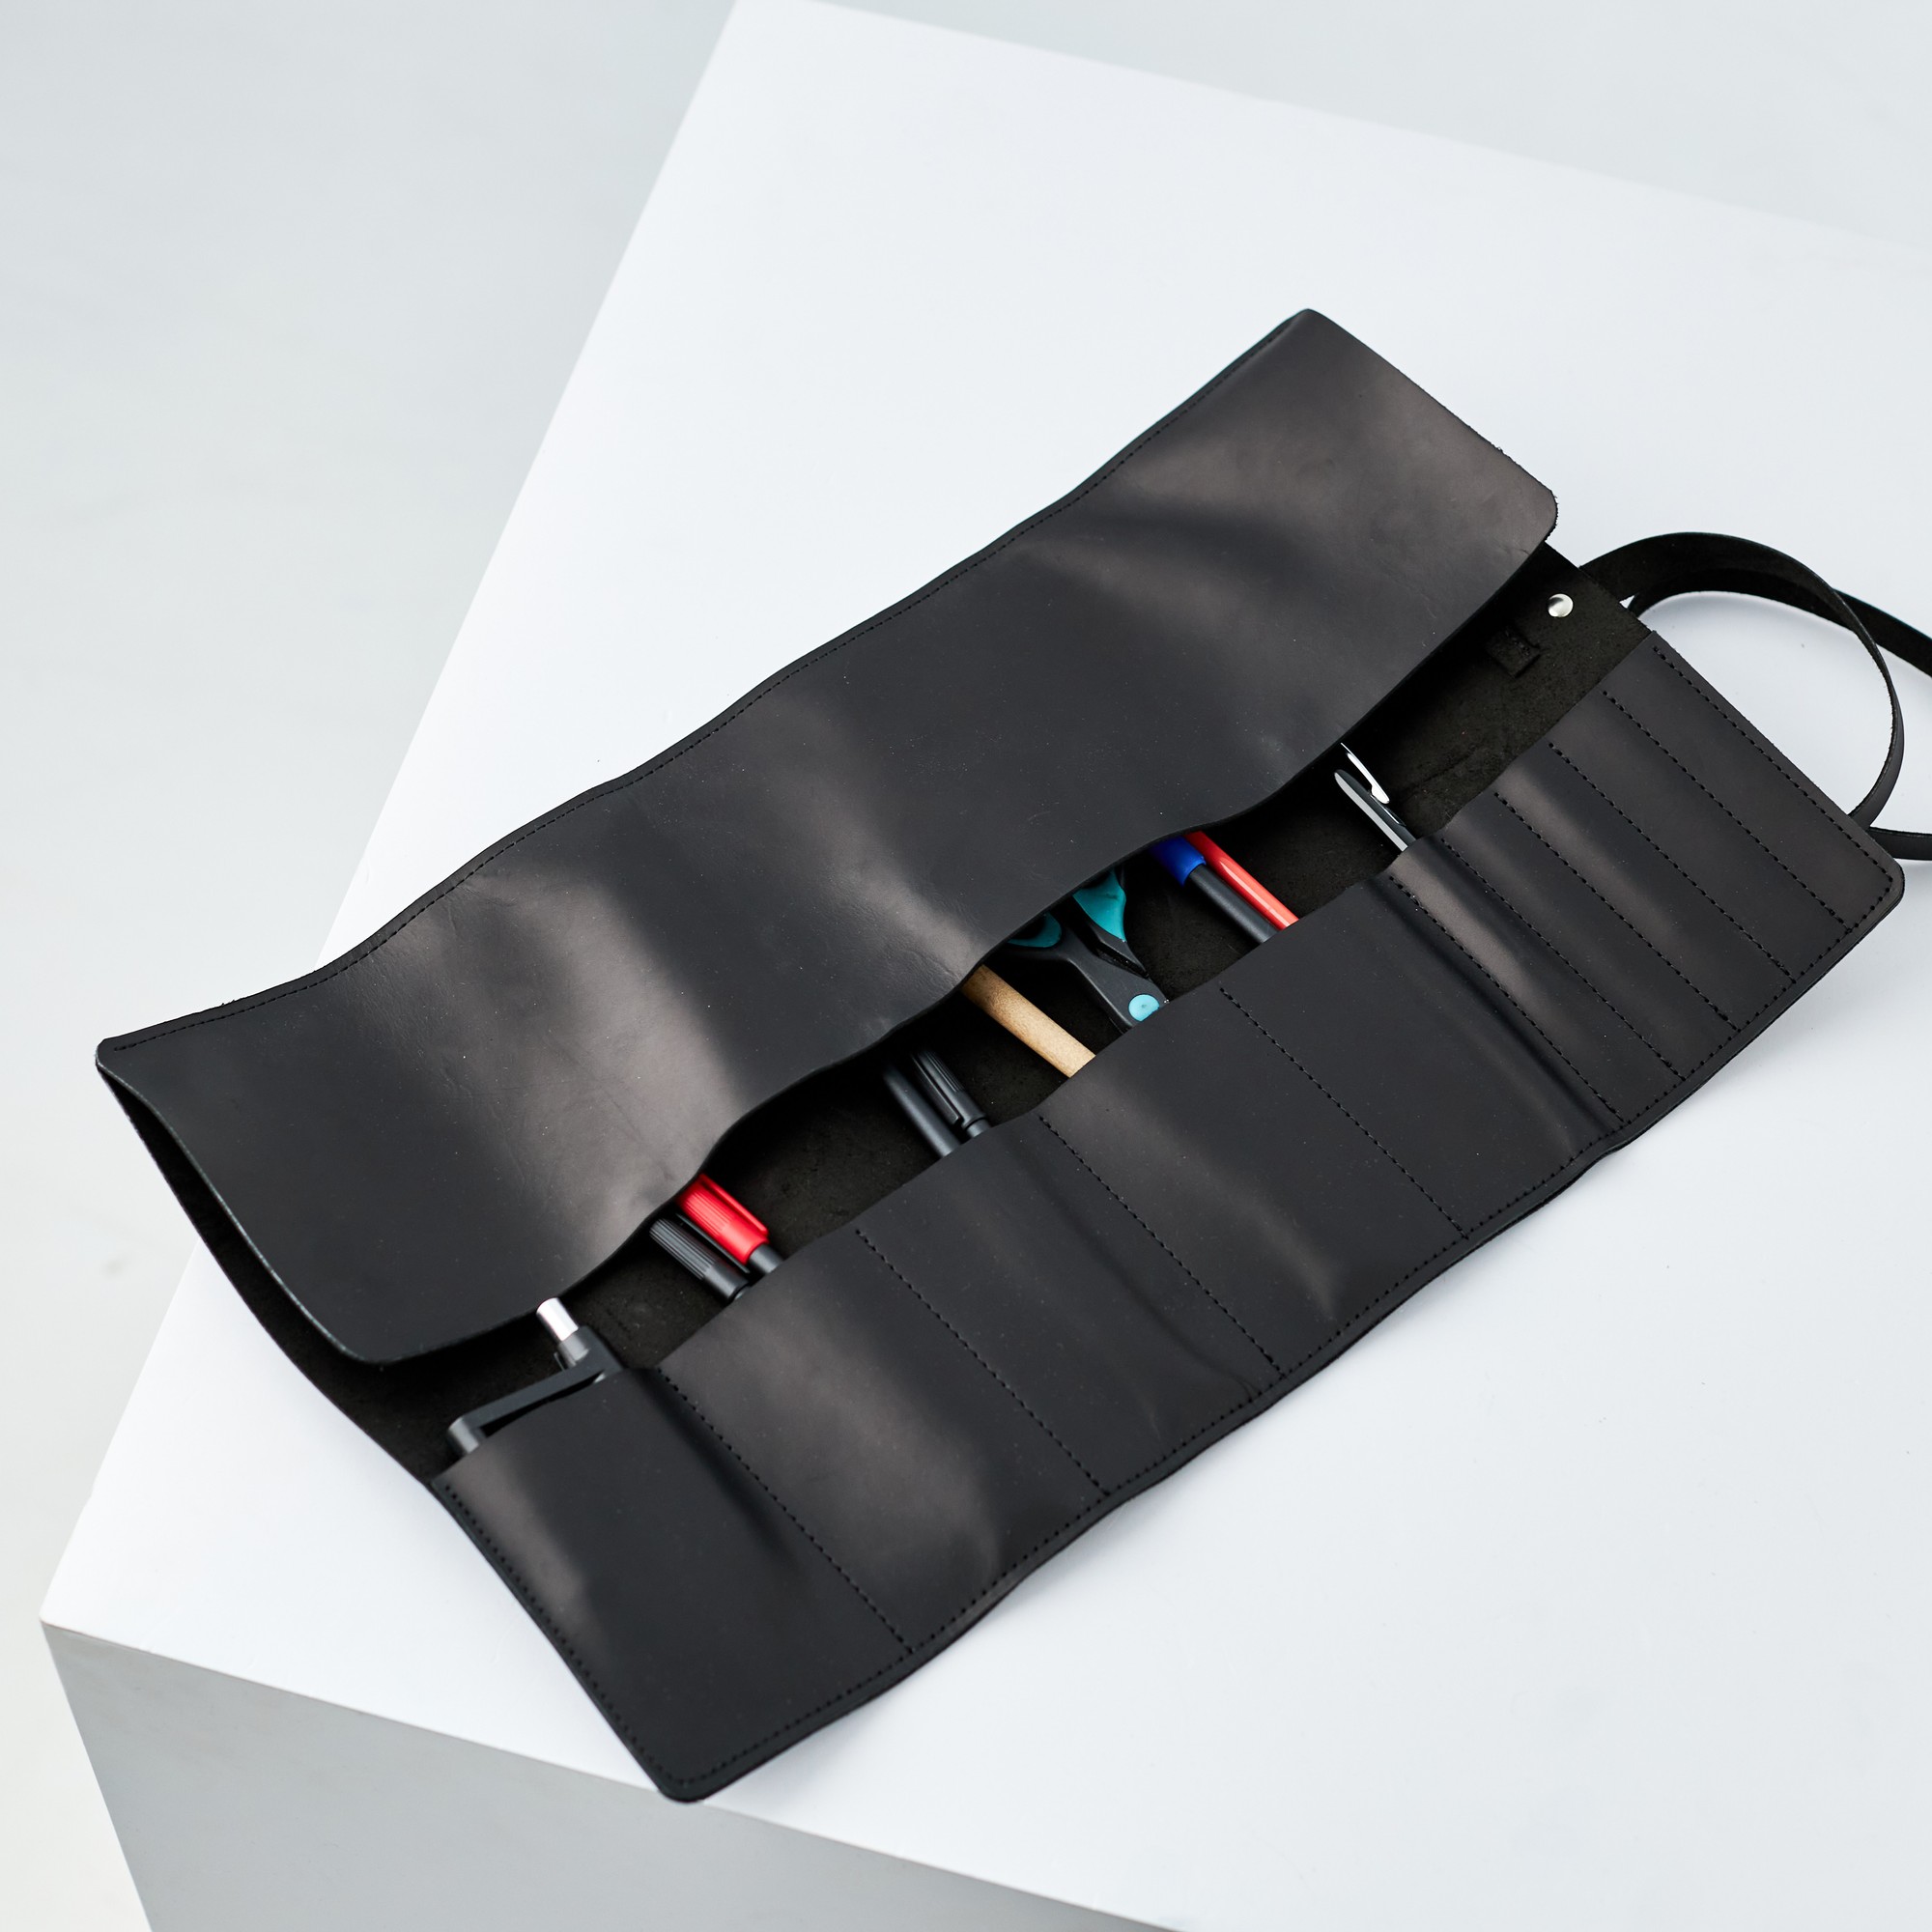 Pencil organizer case - 29121 from Pikore Shop with donate to u24